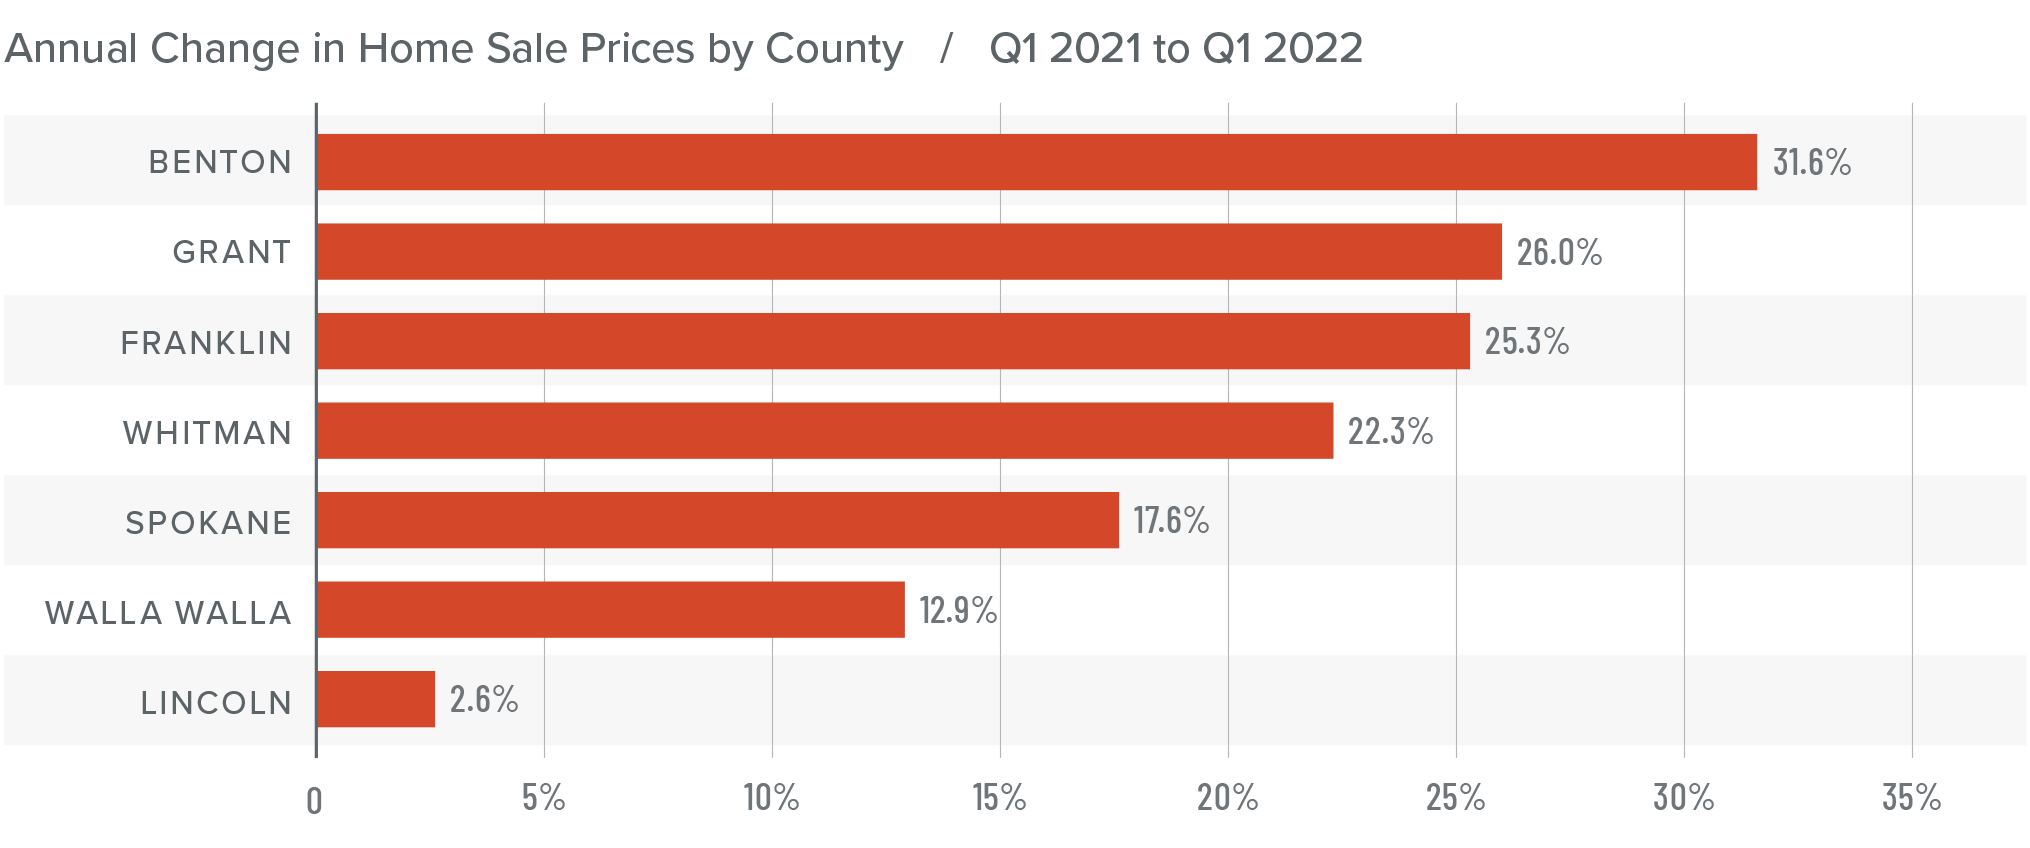 A bar graph showing the annual change in home sale prices for various counties in Eastern Washington from Q1 2021 to Q1 2022.